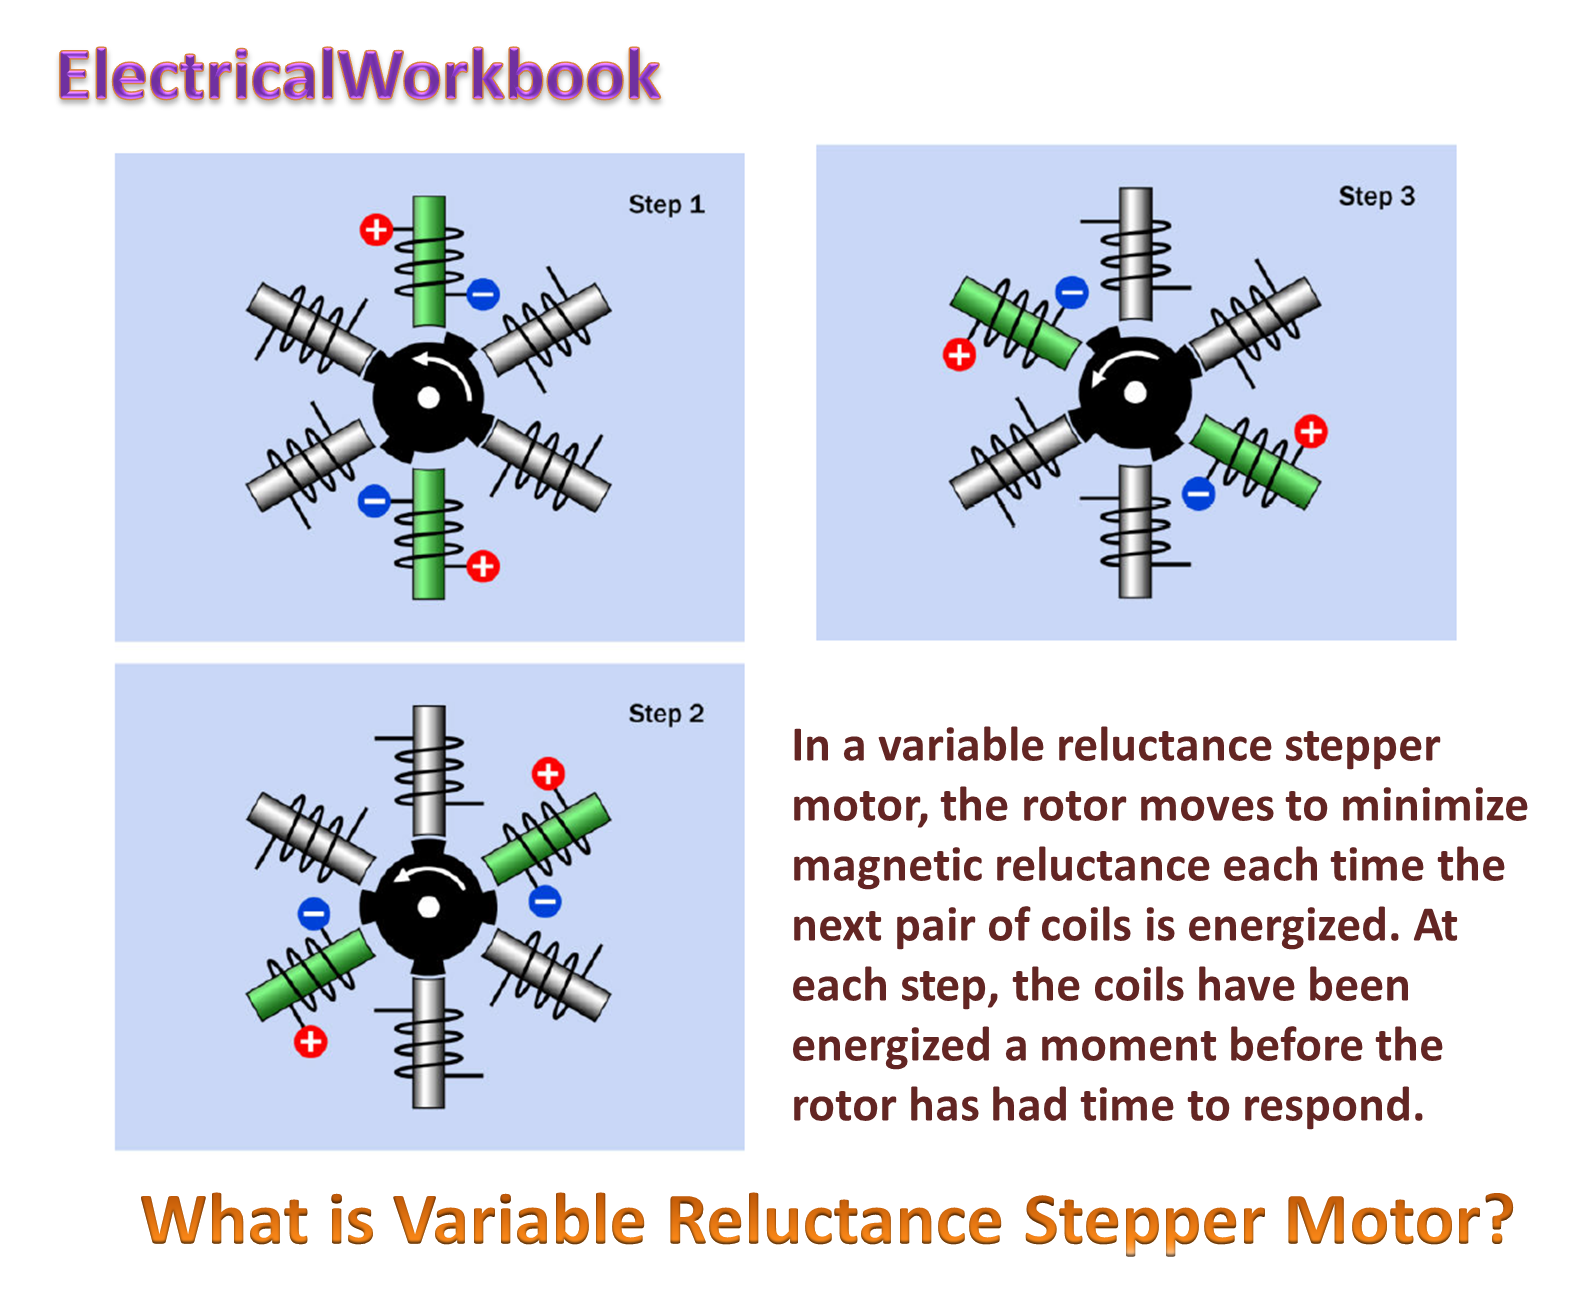 What is Variable Reluctance Stepper Motor